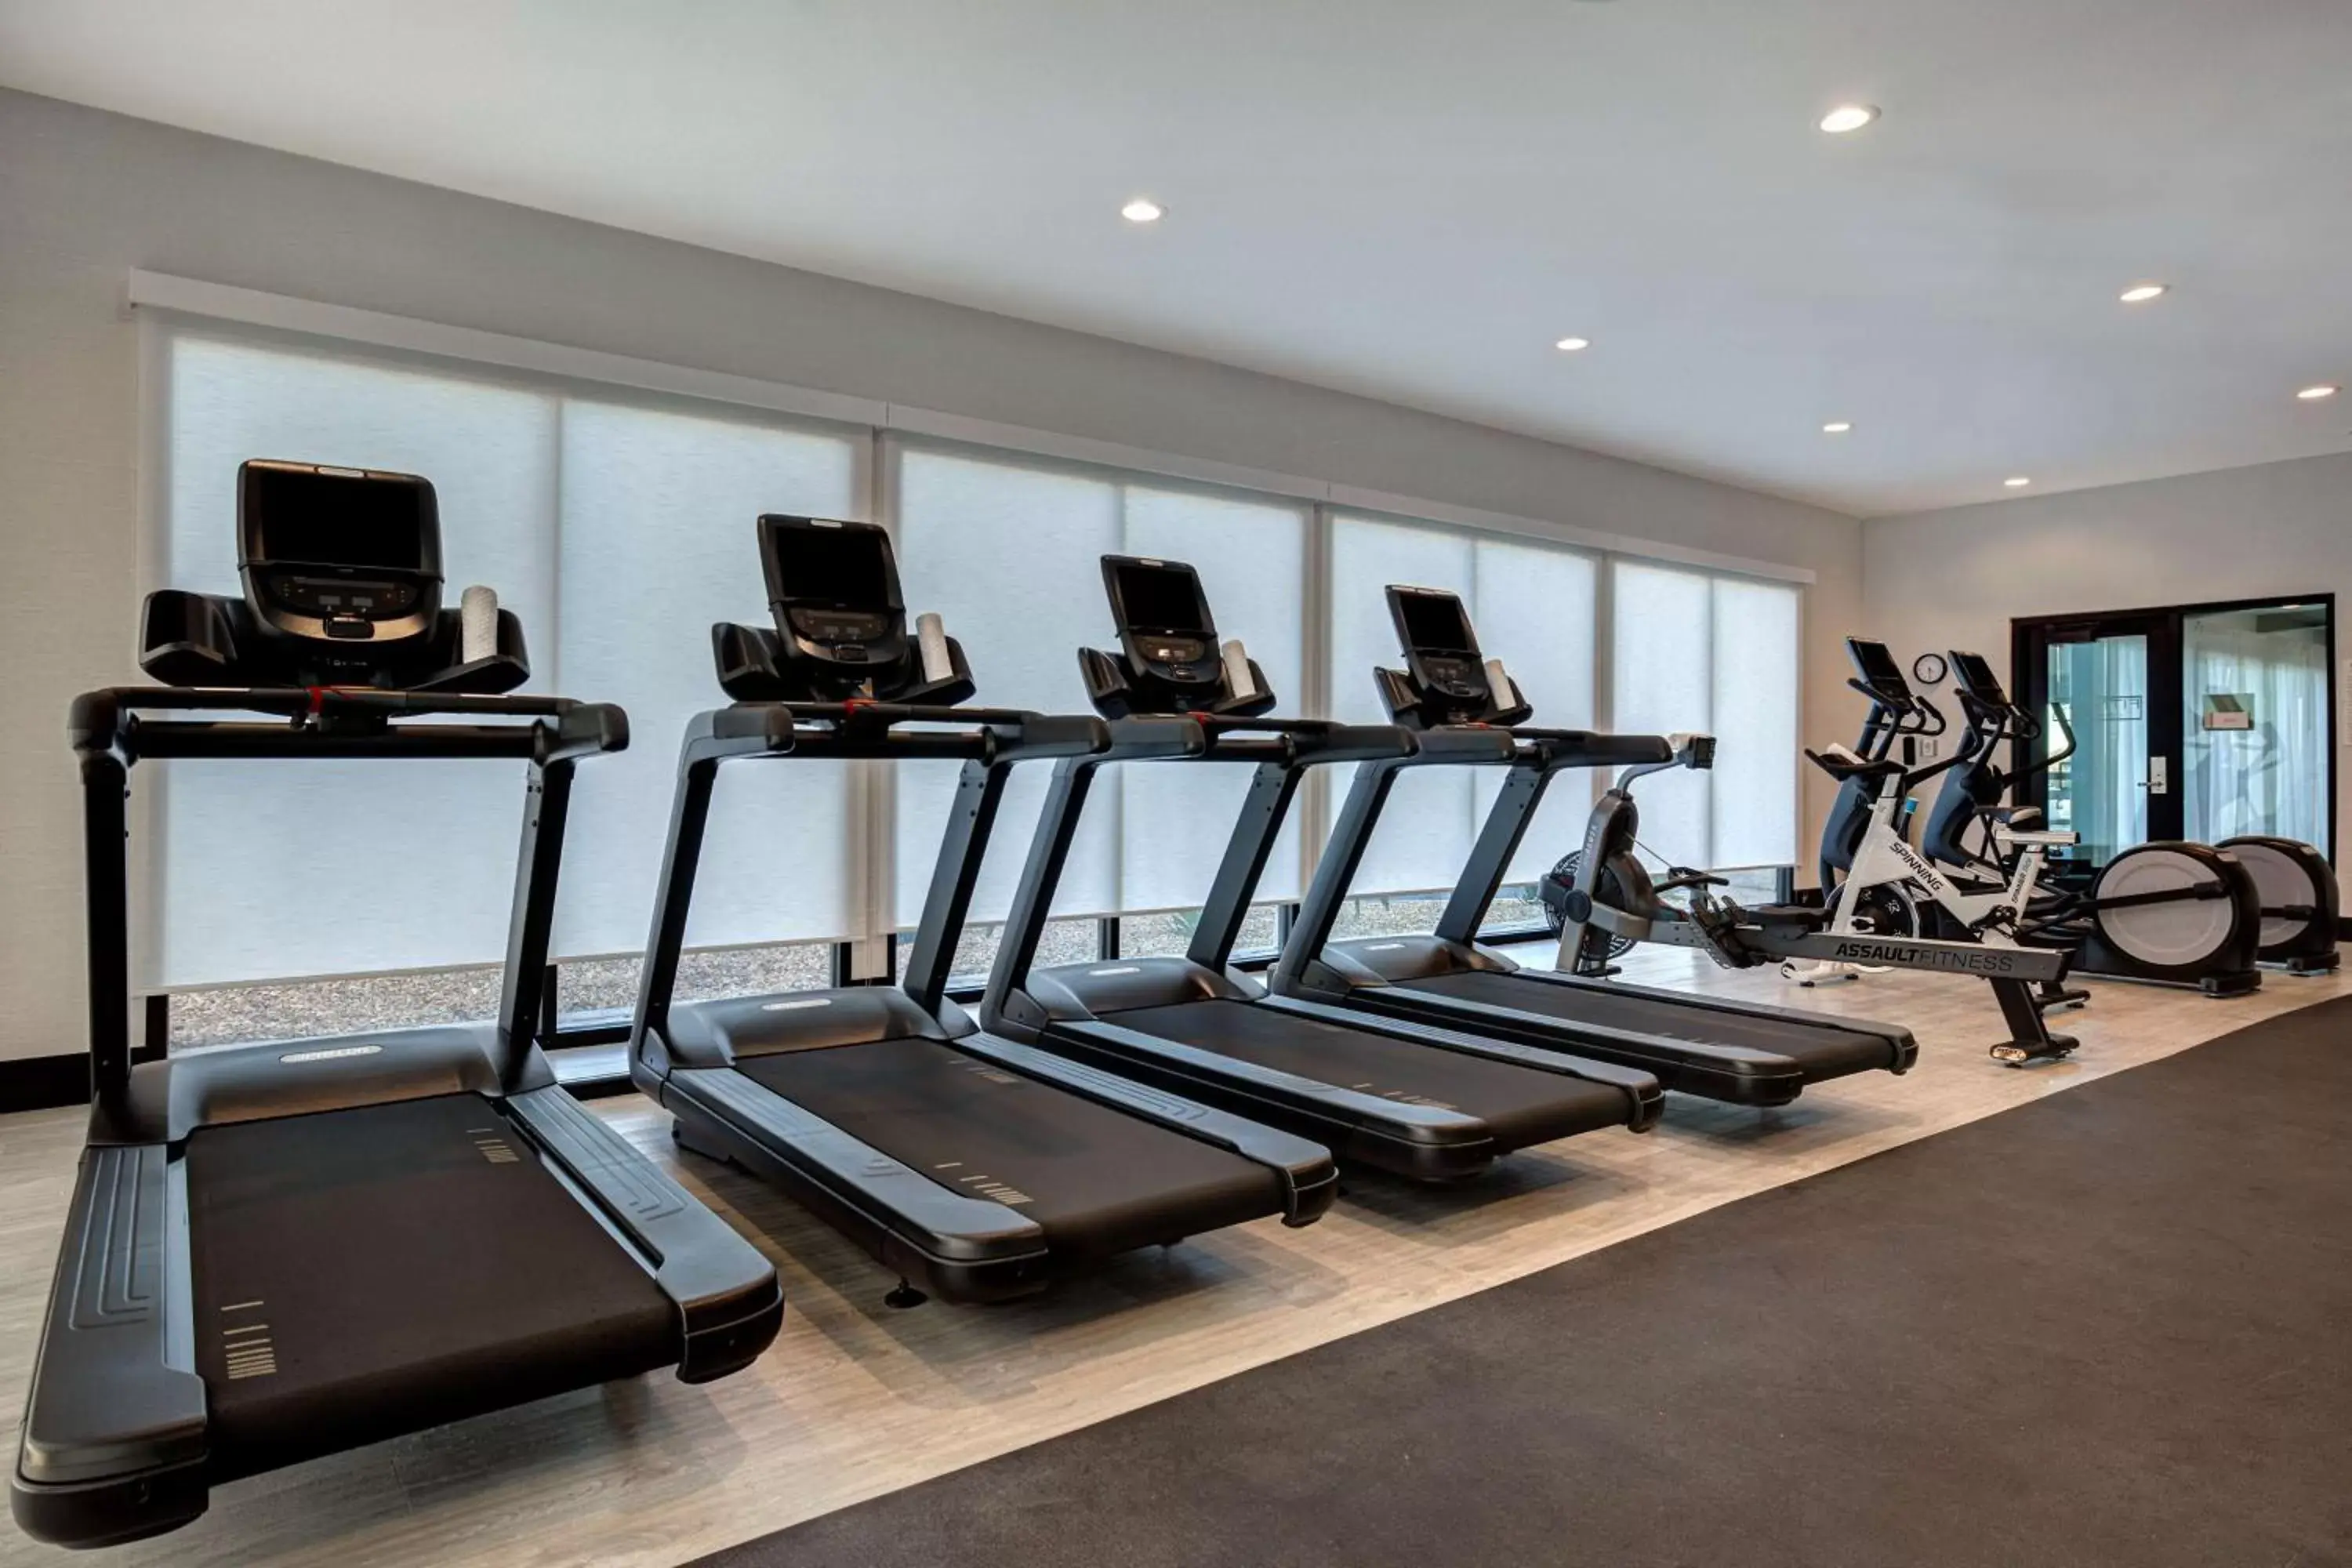 Fitness centre/facilities, Fitness Center/Facilities in Doubletree By Hilton Palmdale, Ca